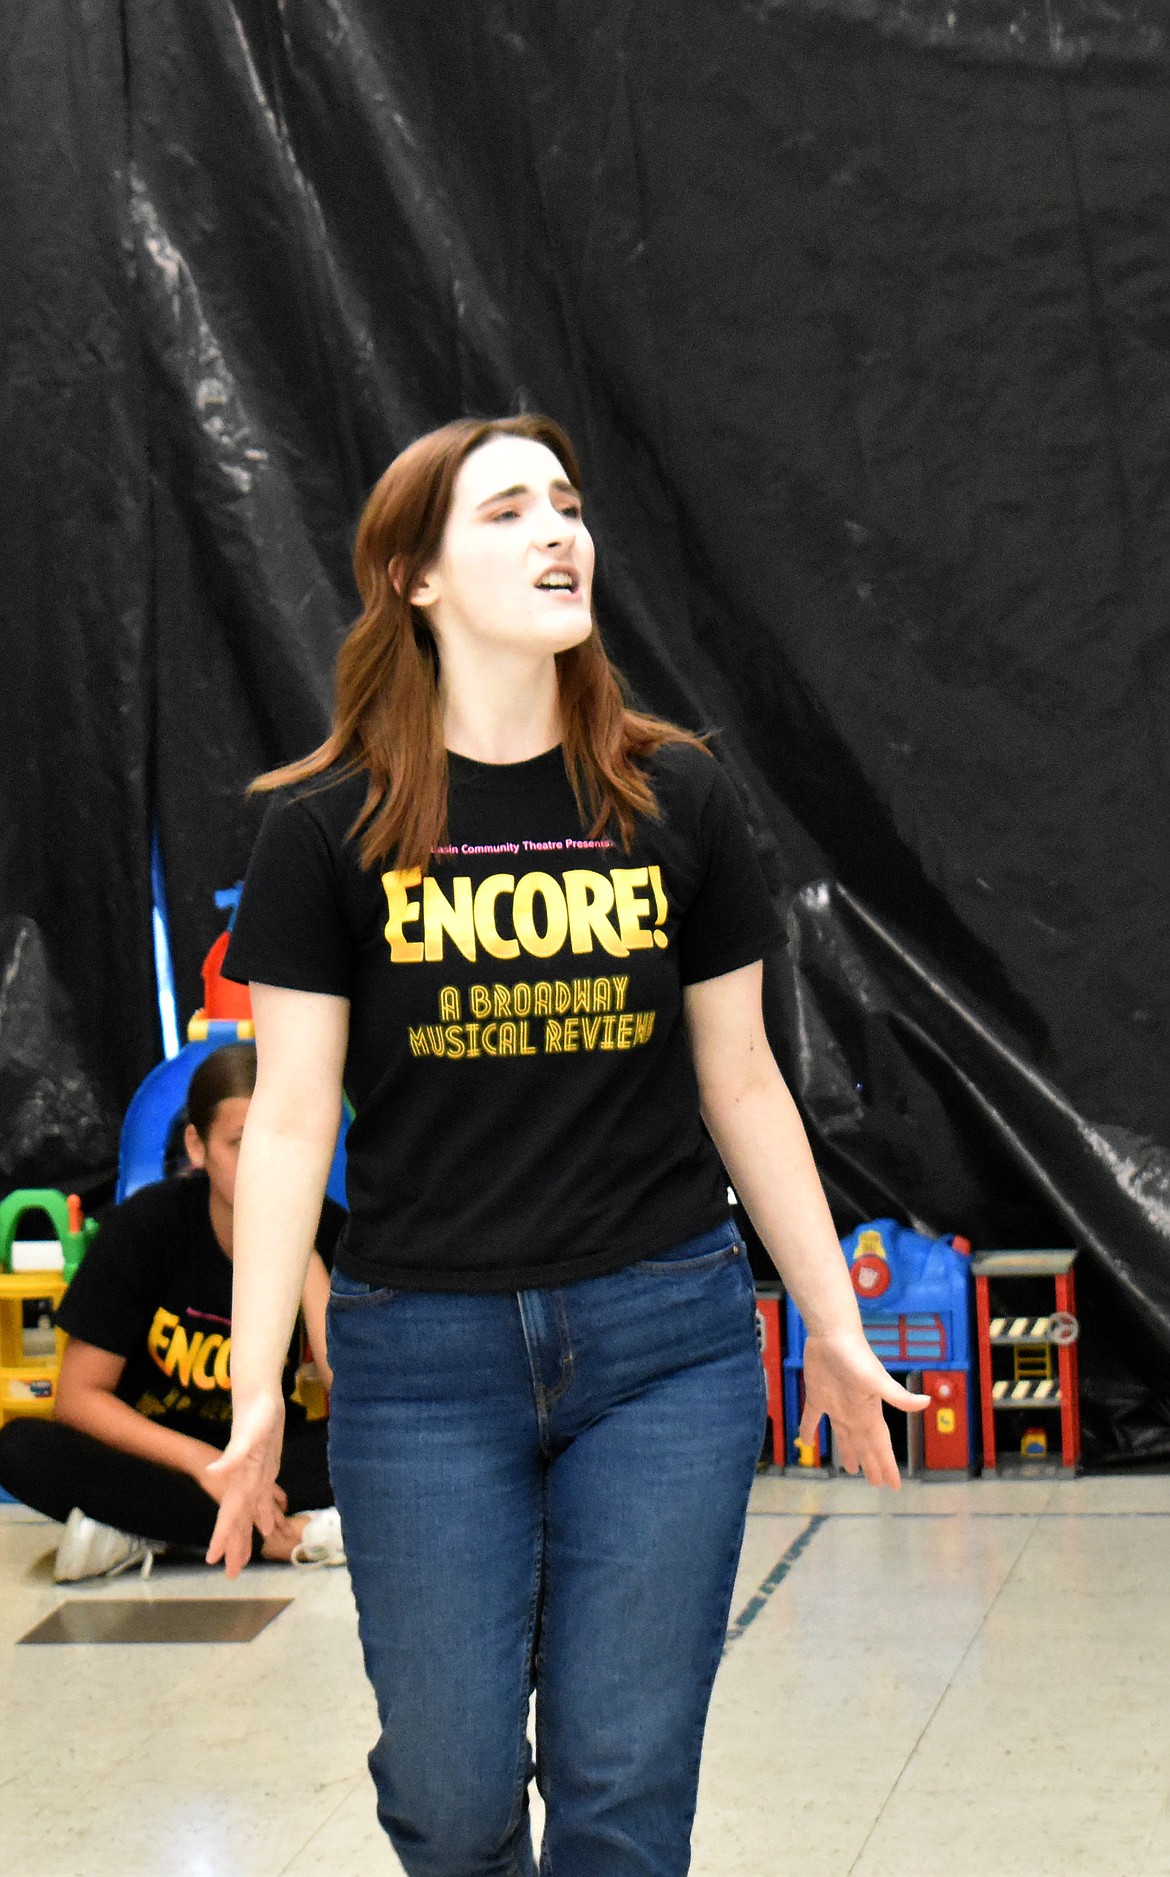 Claire Smith sings “Pulled,” from the musical “The Addams Family” in a rehearsal of Basin Community Theatre’s “Encore! A Broadway Review.”